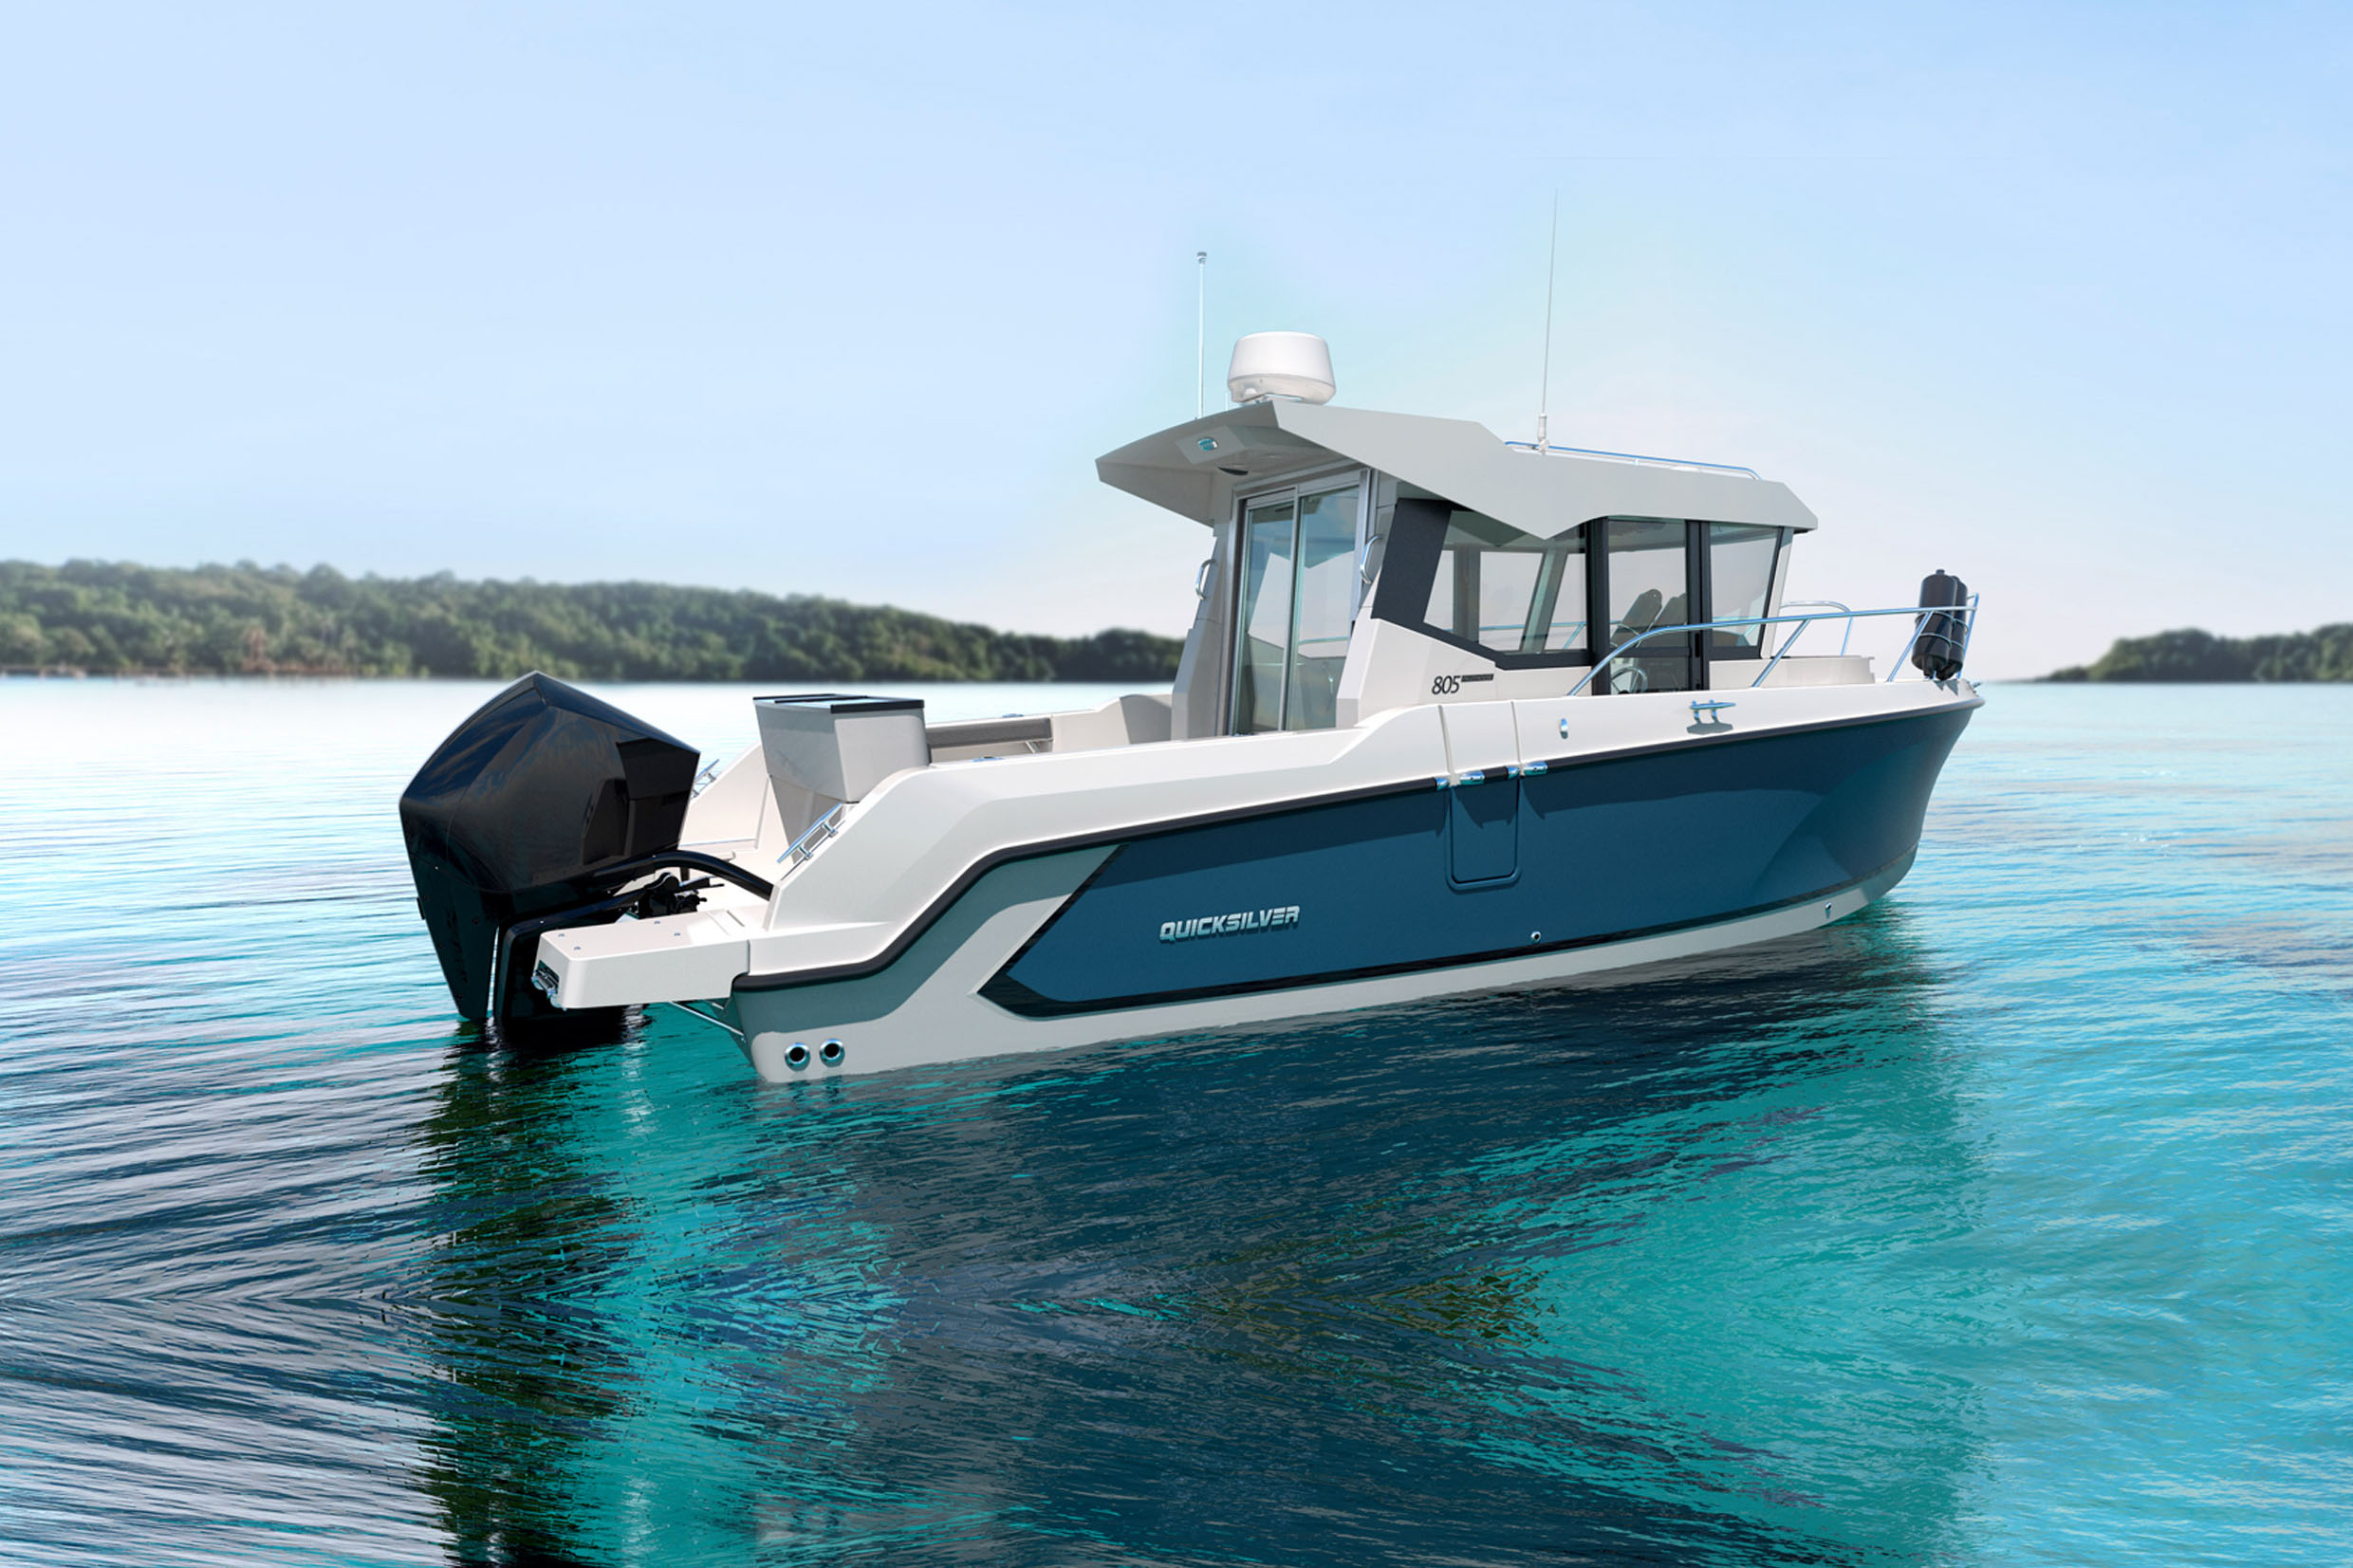 Fish be aware: the 805 Pilothouse is on its way